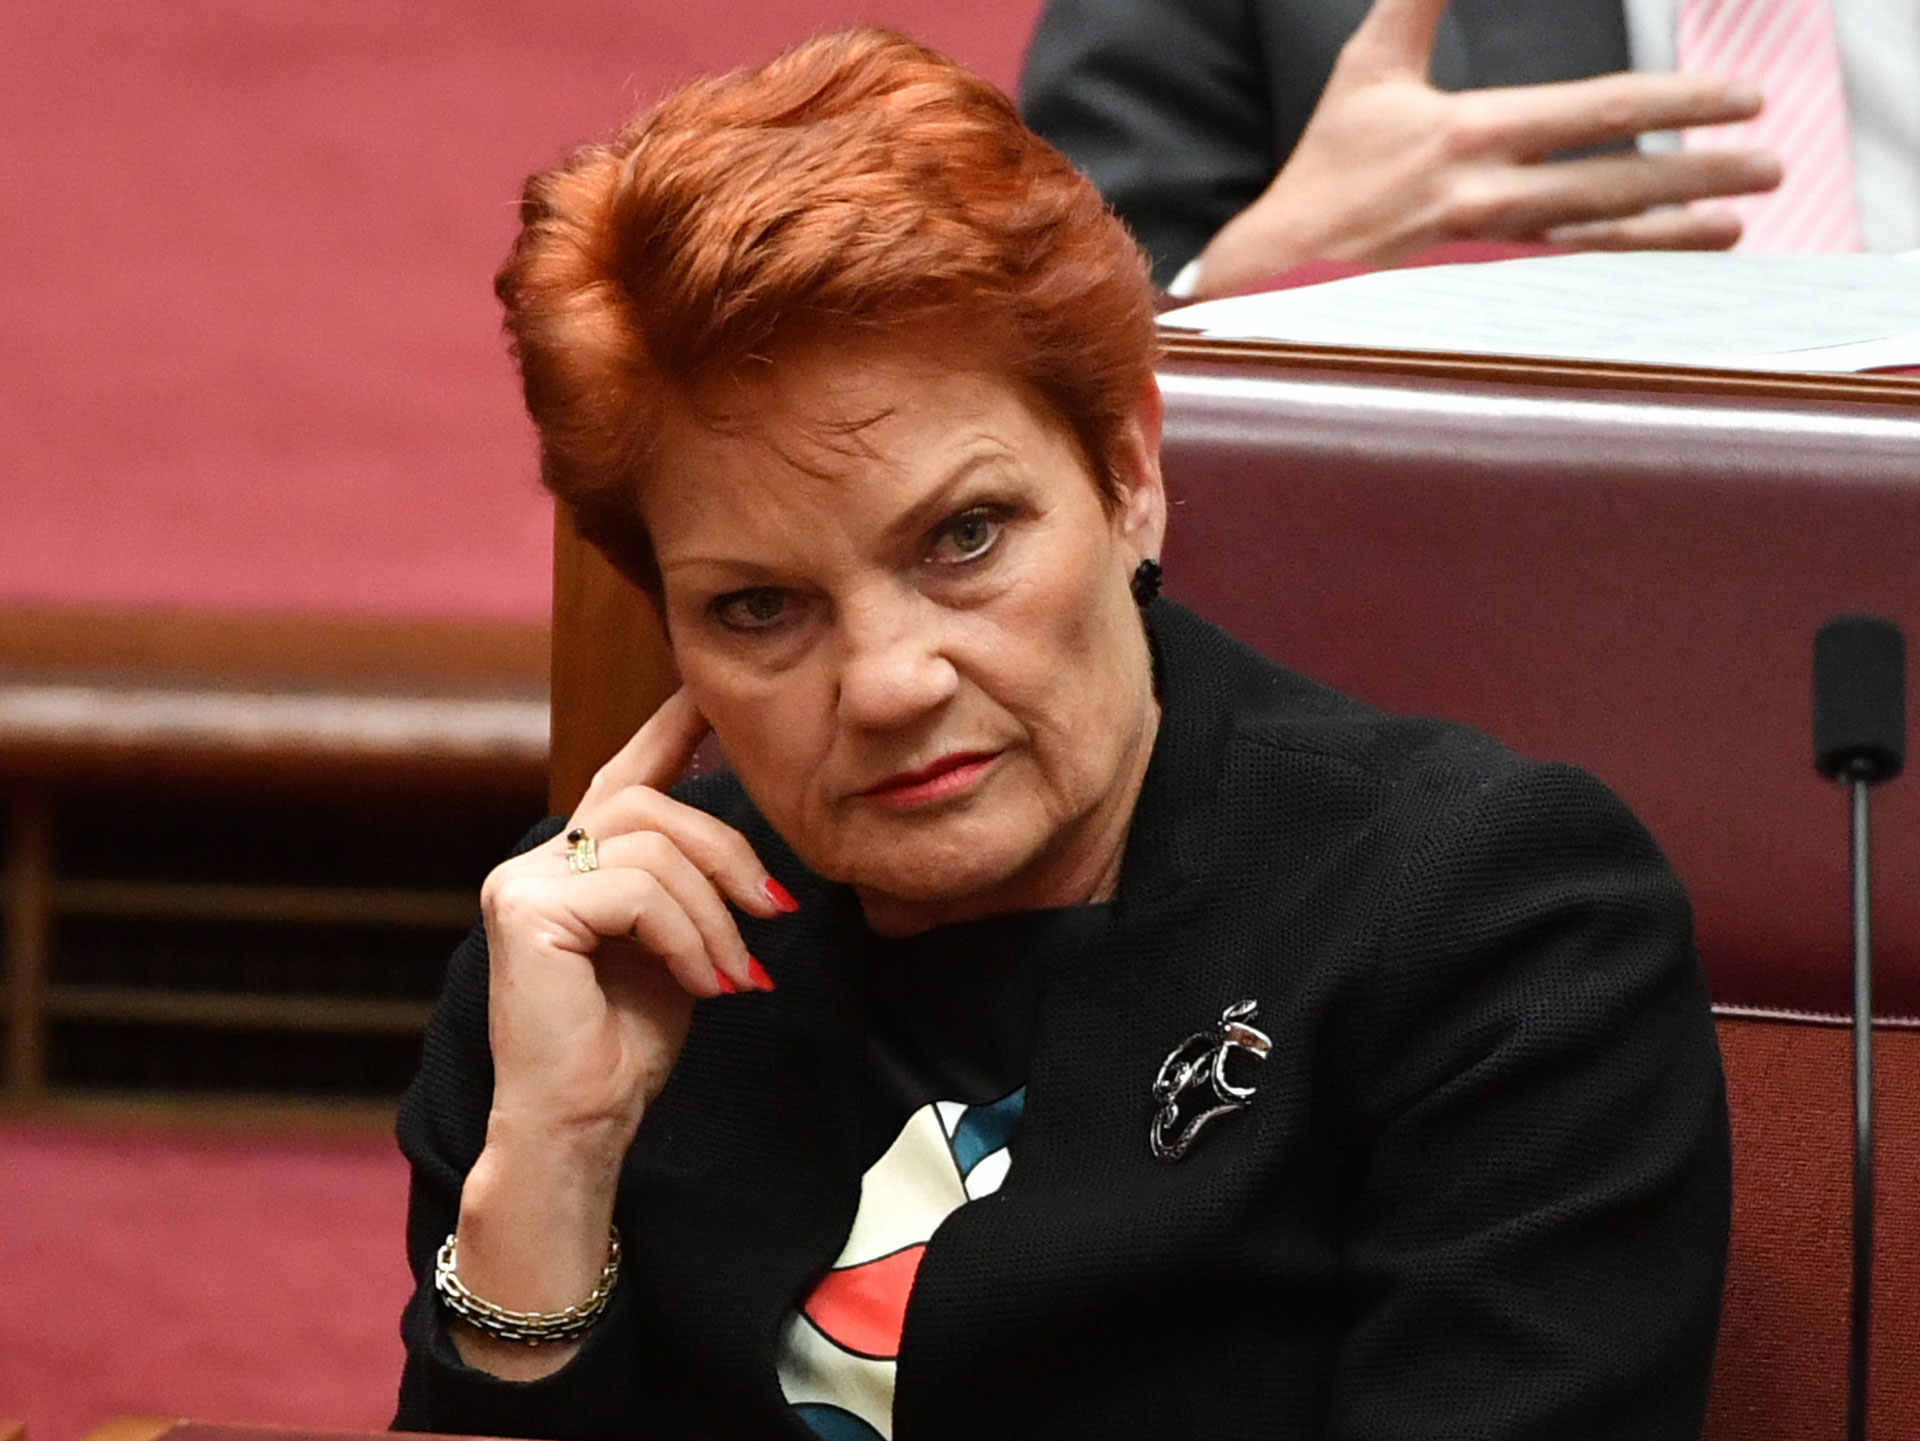 Pauline Hanson wants to “get rid of” autistic children from mainstream classrooms